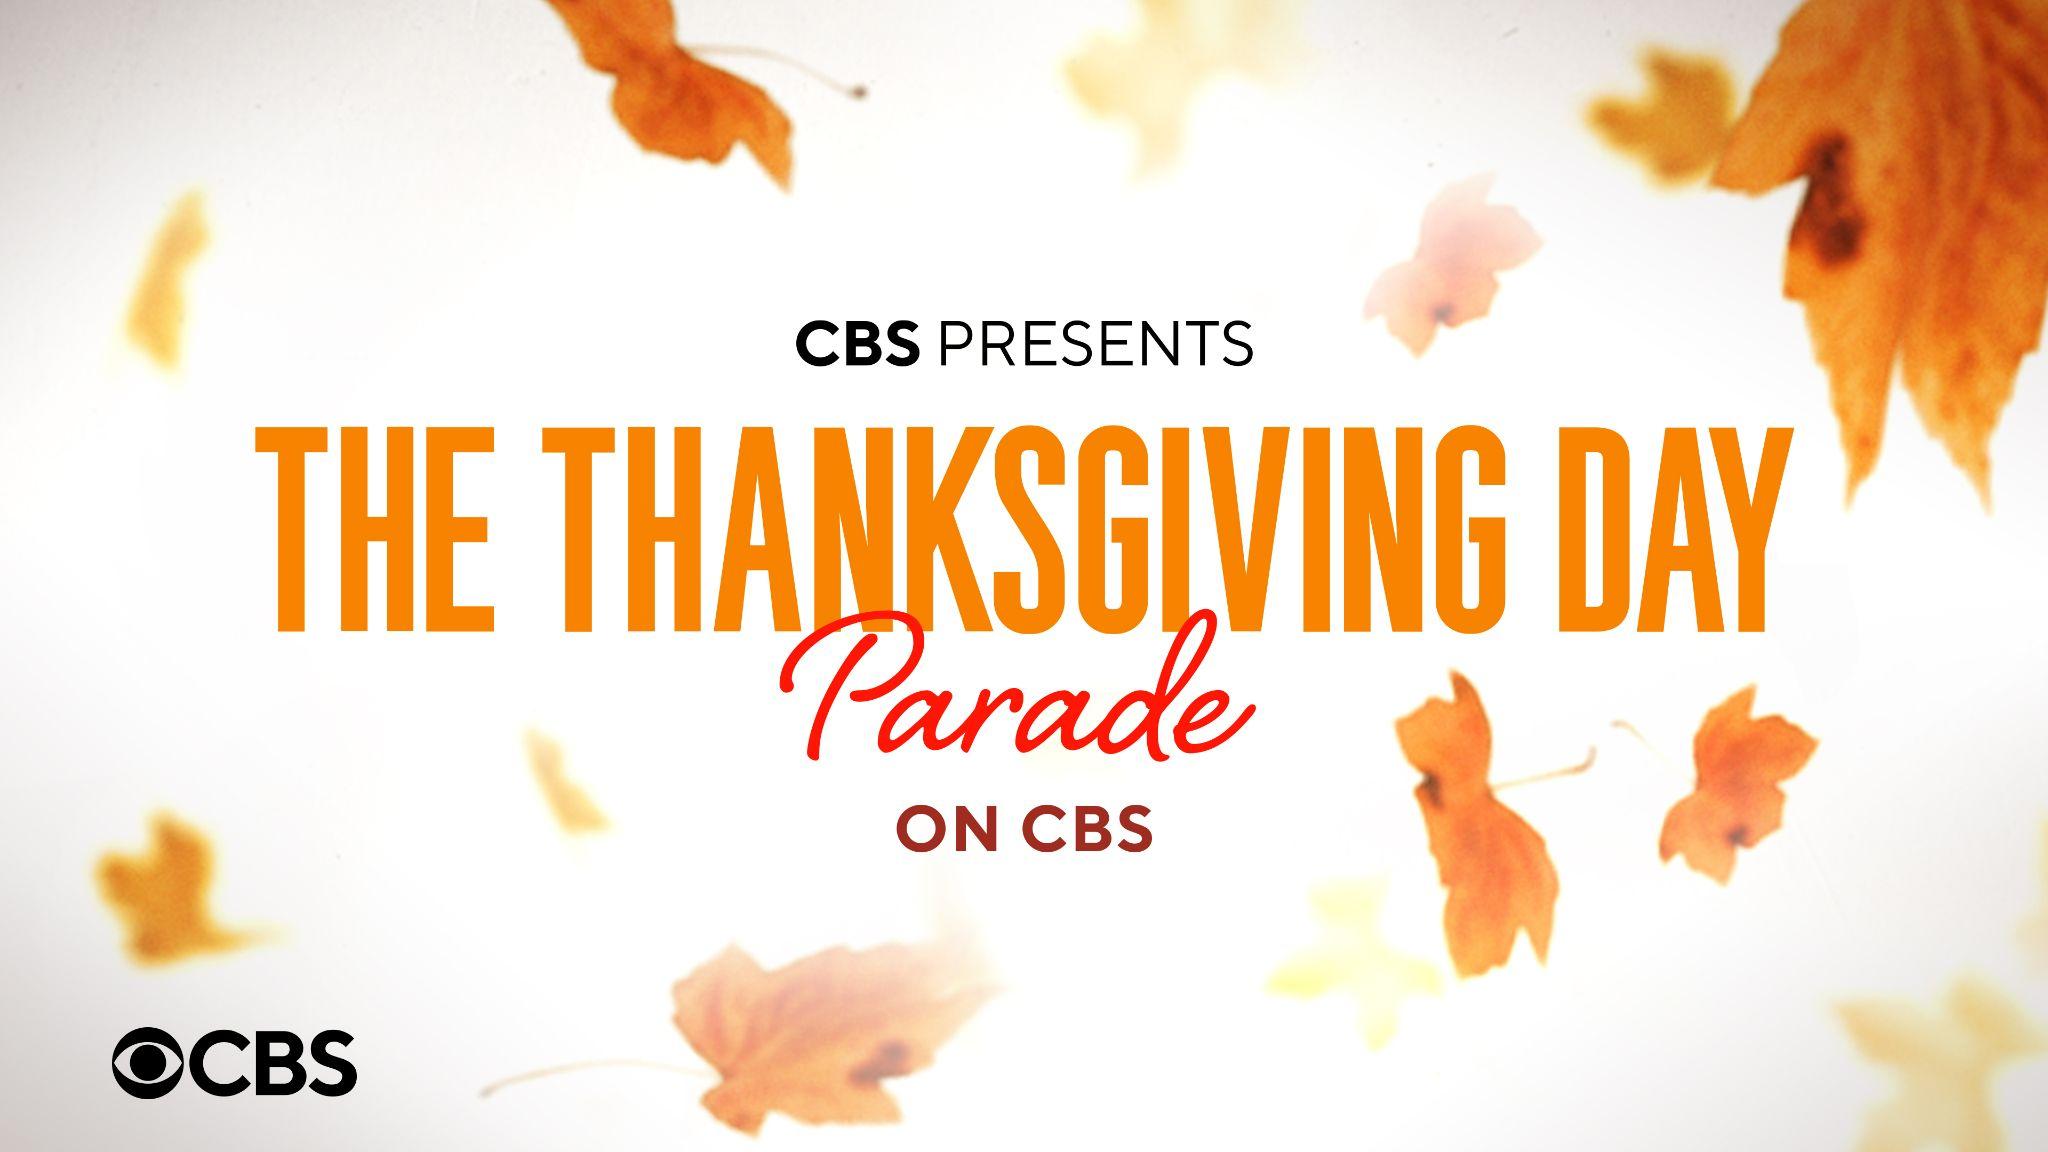 Paramount Press Express | “THE THANKSGIVING DAY PARADE ON CBS,” ANCHORED BY  EMMY AWARD-WINNING HOSTS KEVIN FRAZIER AND KELTIE KNIGHT, WILL AIR LIVE  FROM NEW YORK CITY, THURSDAY, NOV. 24